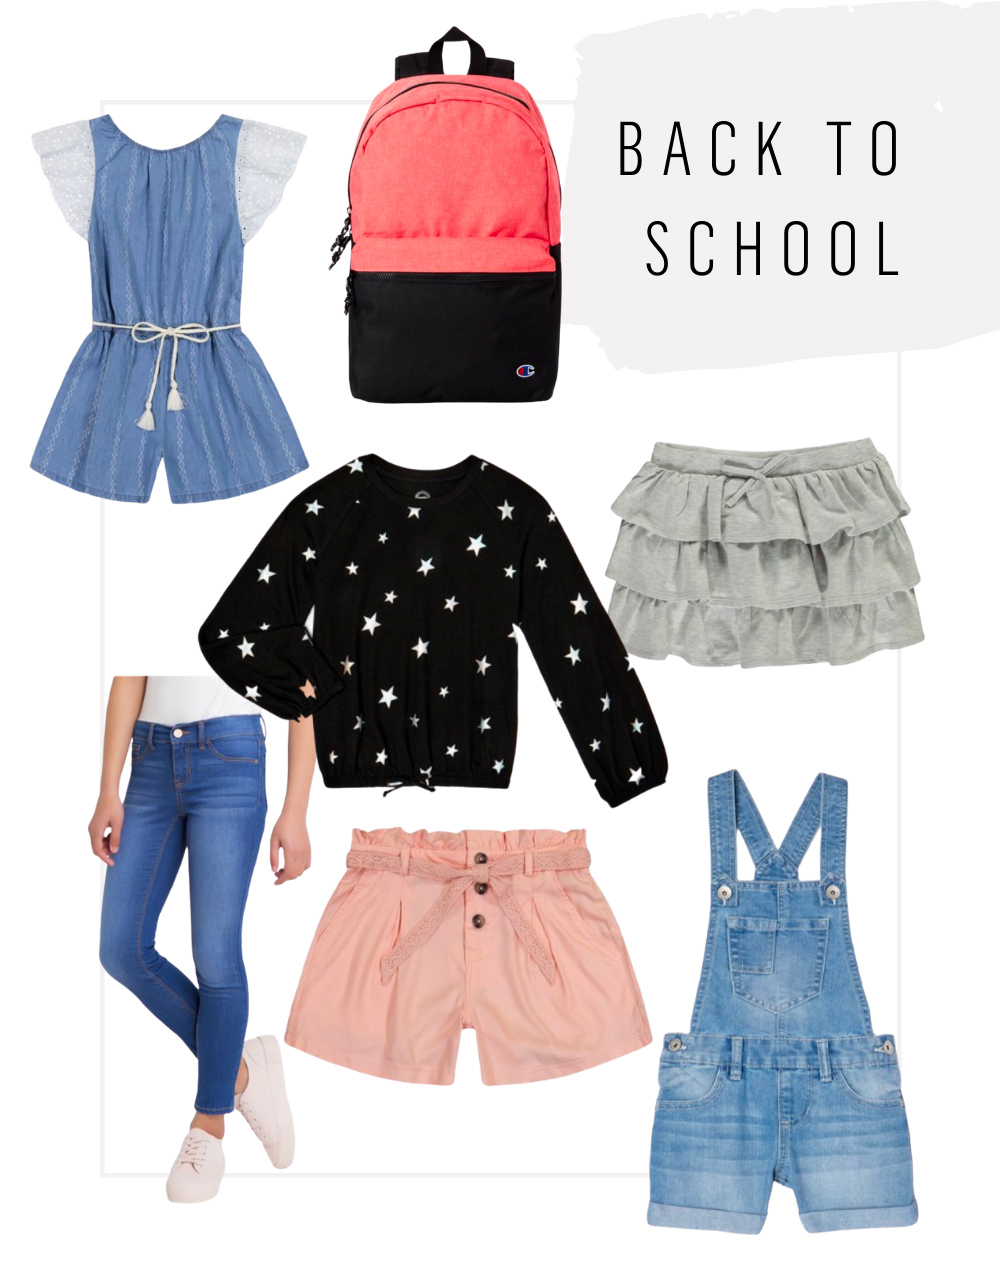 kailee wright walmart back to school clothes